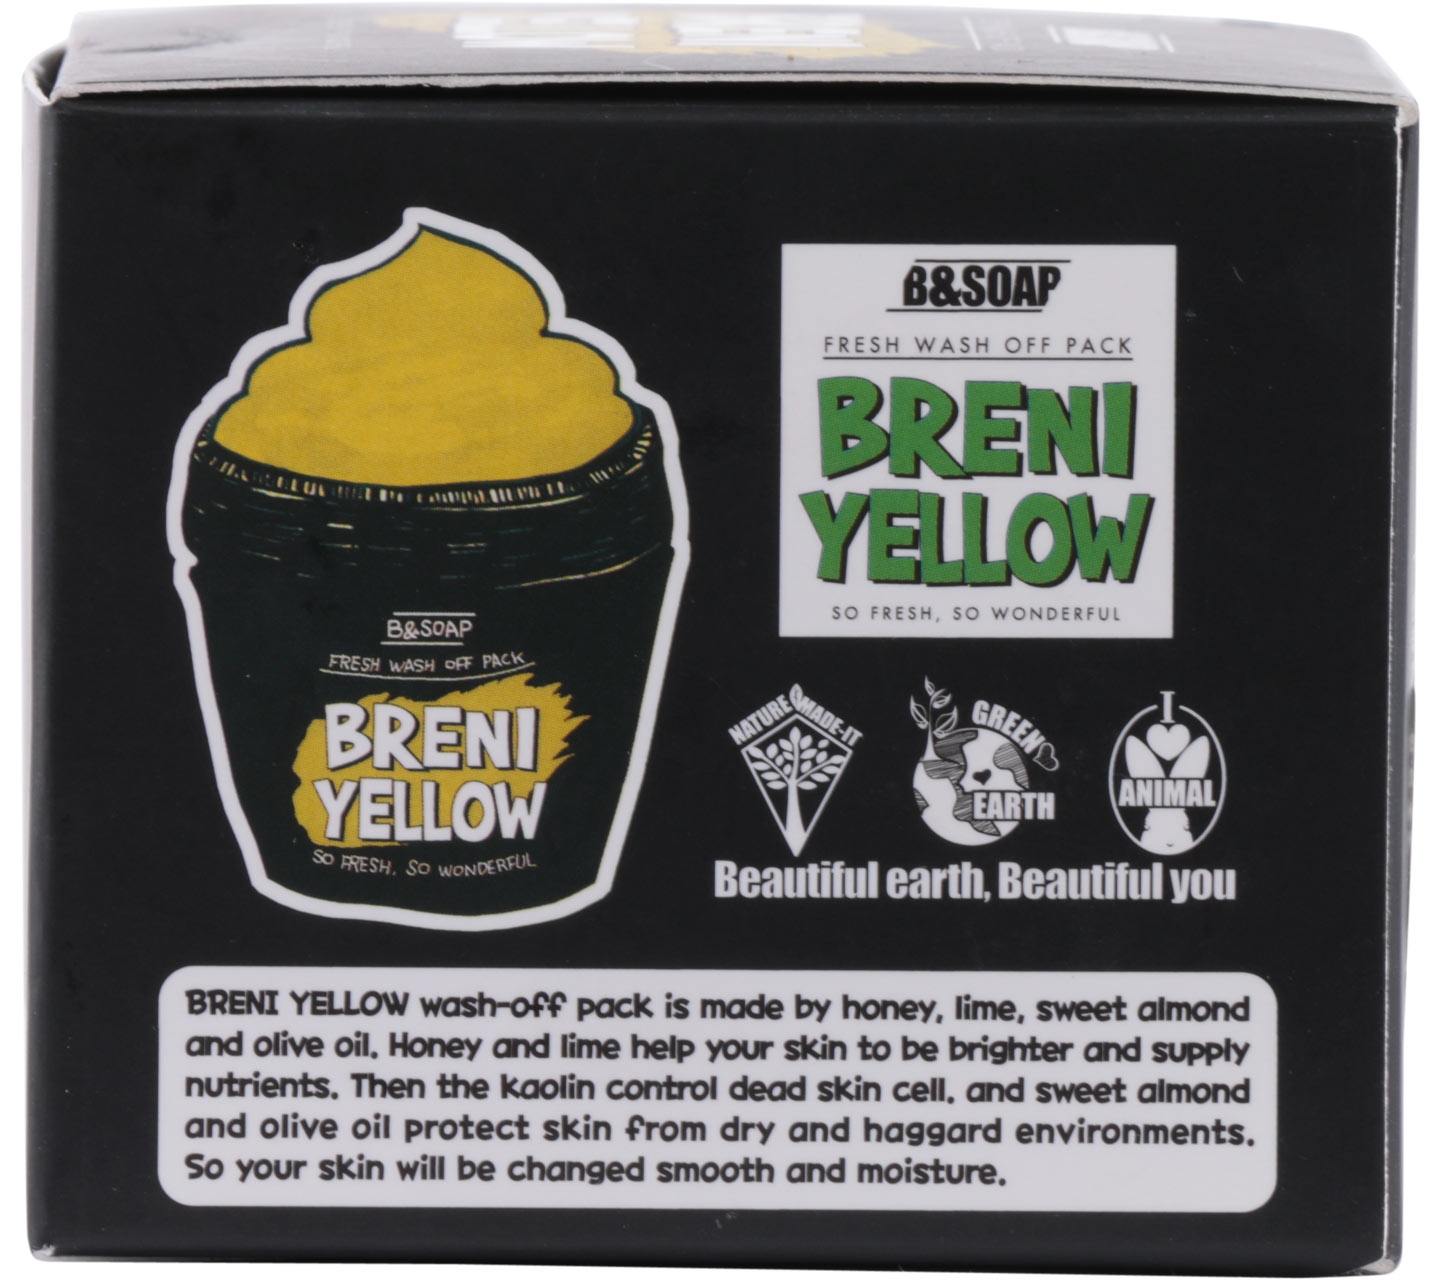 B&Soap Breni Yellow Fresh Wash Off Pack Faces